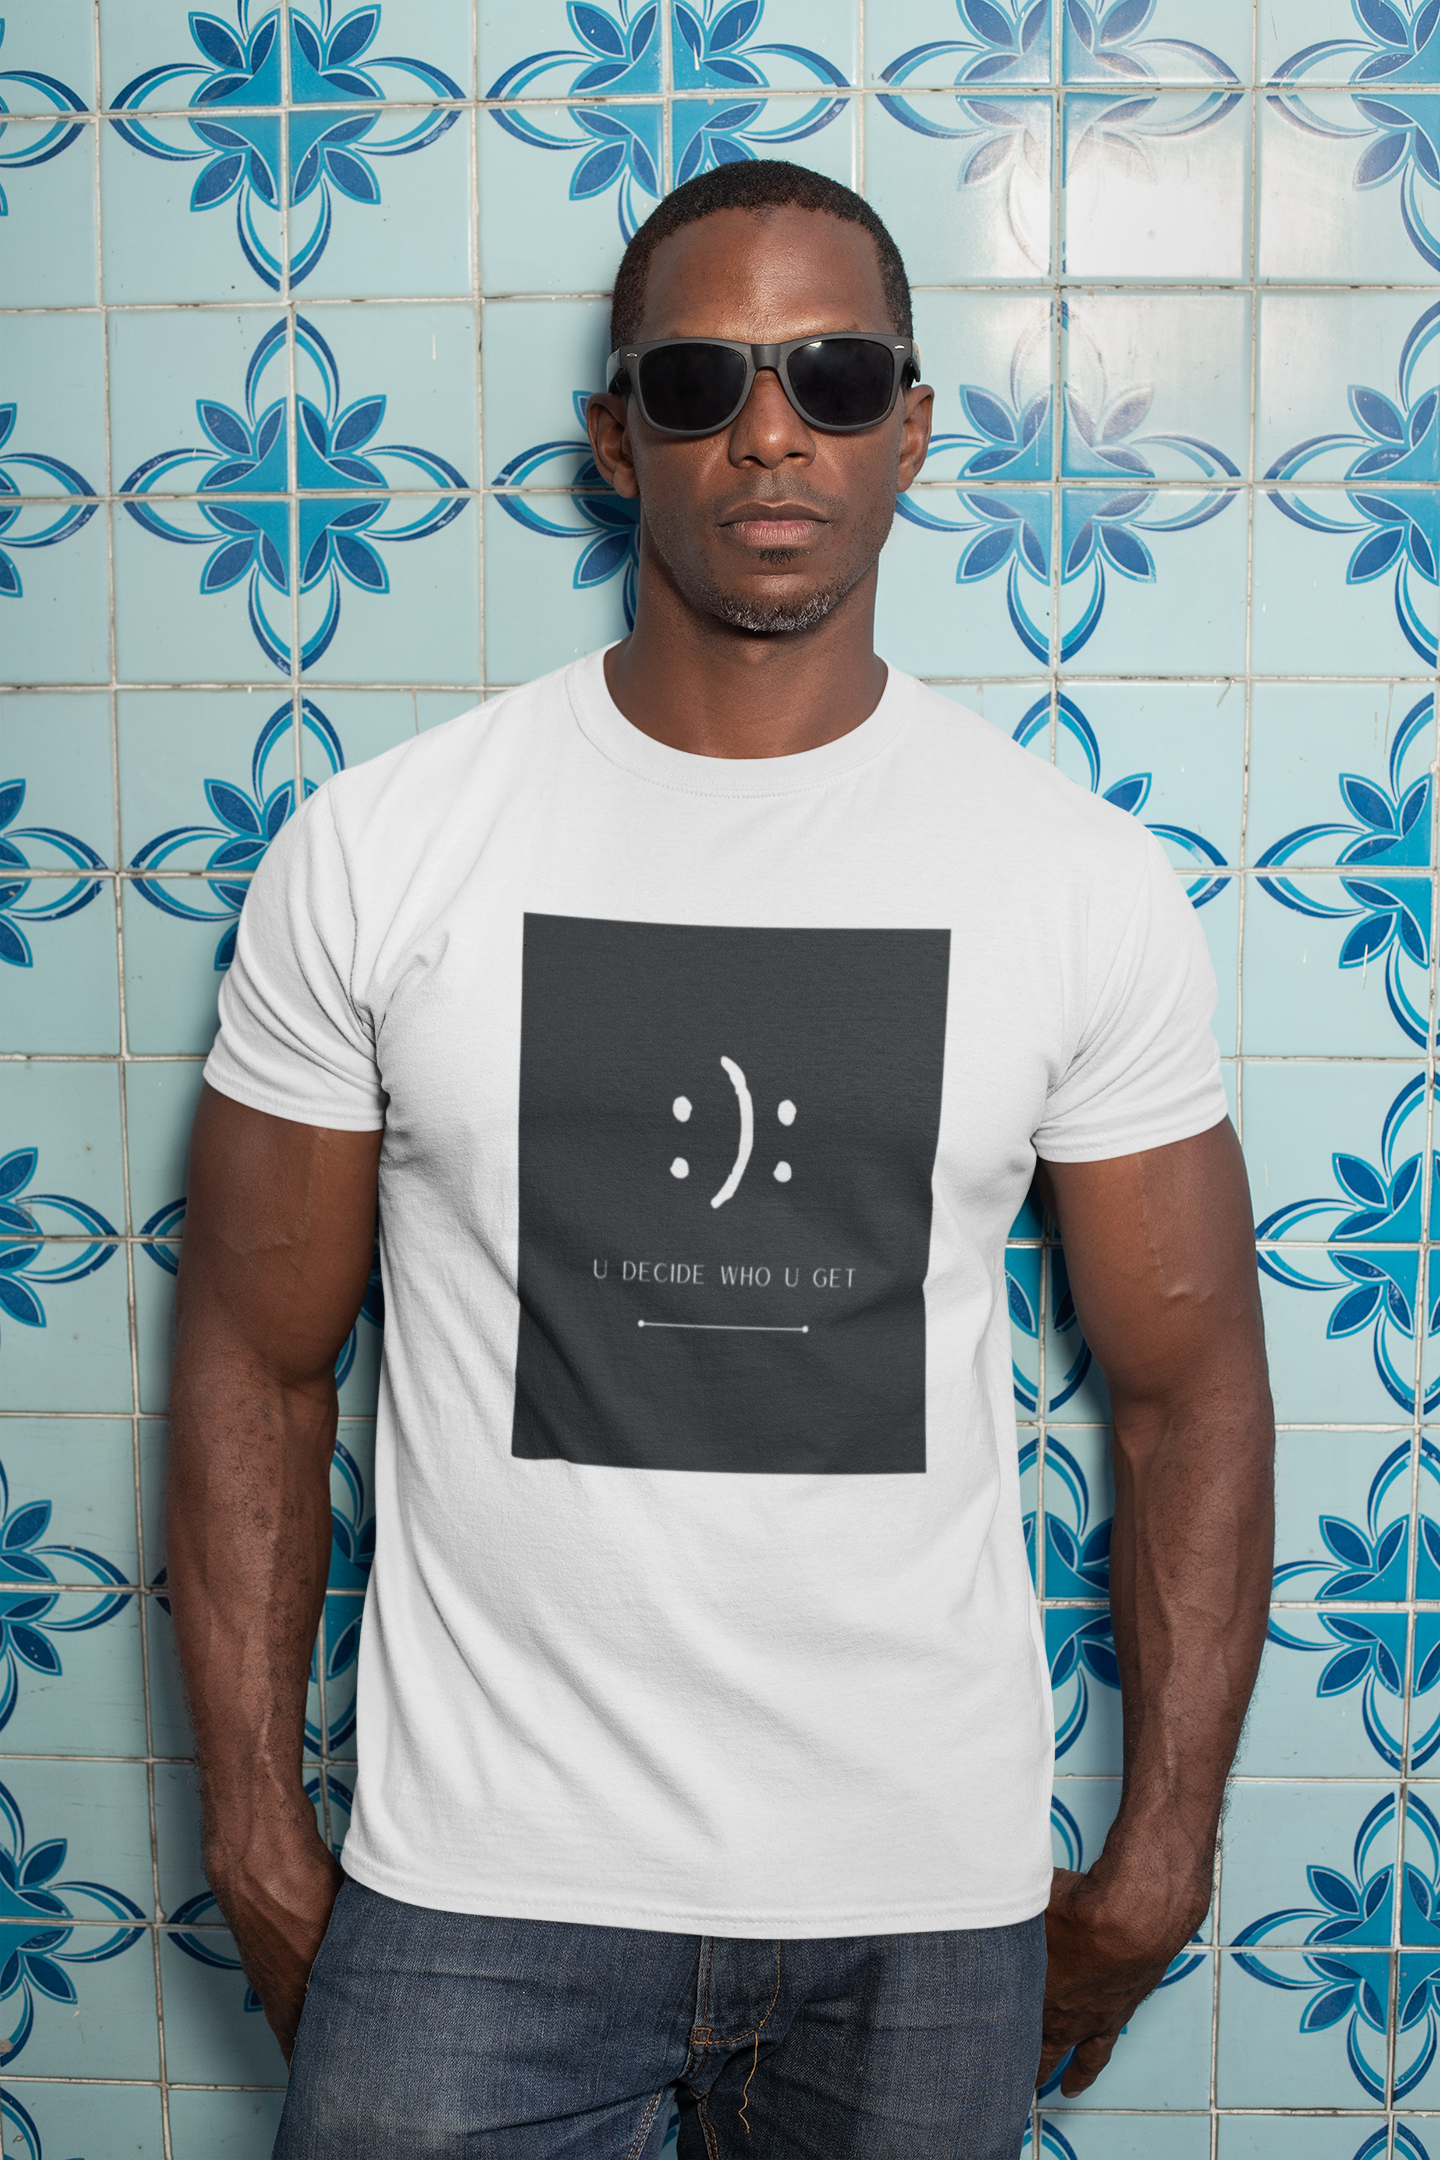 The you decide who you get smiley face cotton t-shirt is perfect for people who can't hide their emotions on their face.  This smiley face will let people know up front your personality in a fun and sassy way.  The edgy modern graphic will fit easily into your stylish wardrobe!